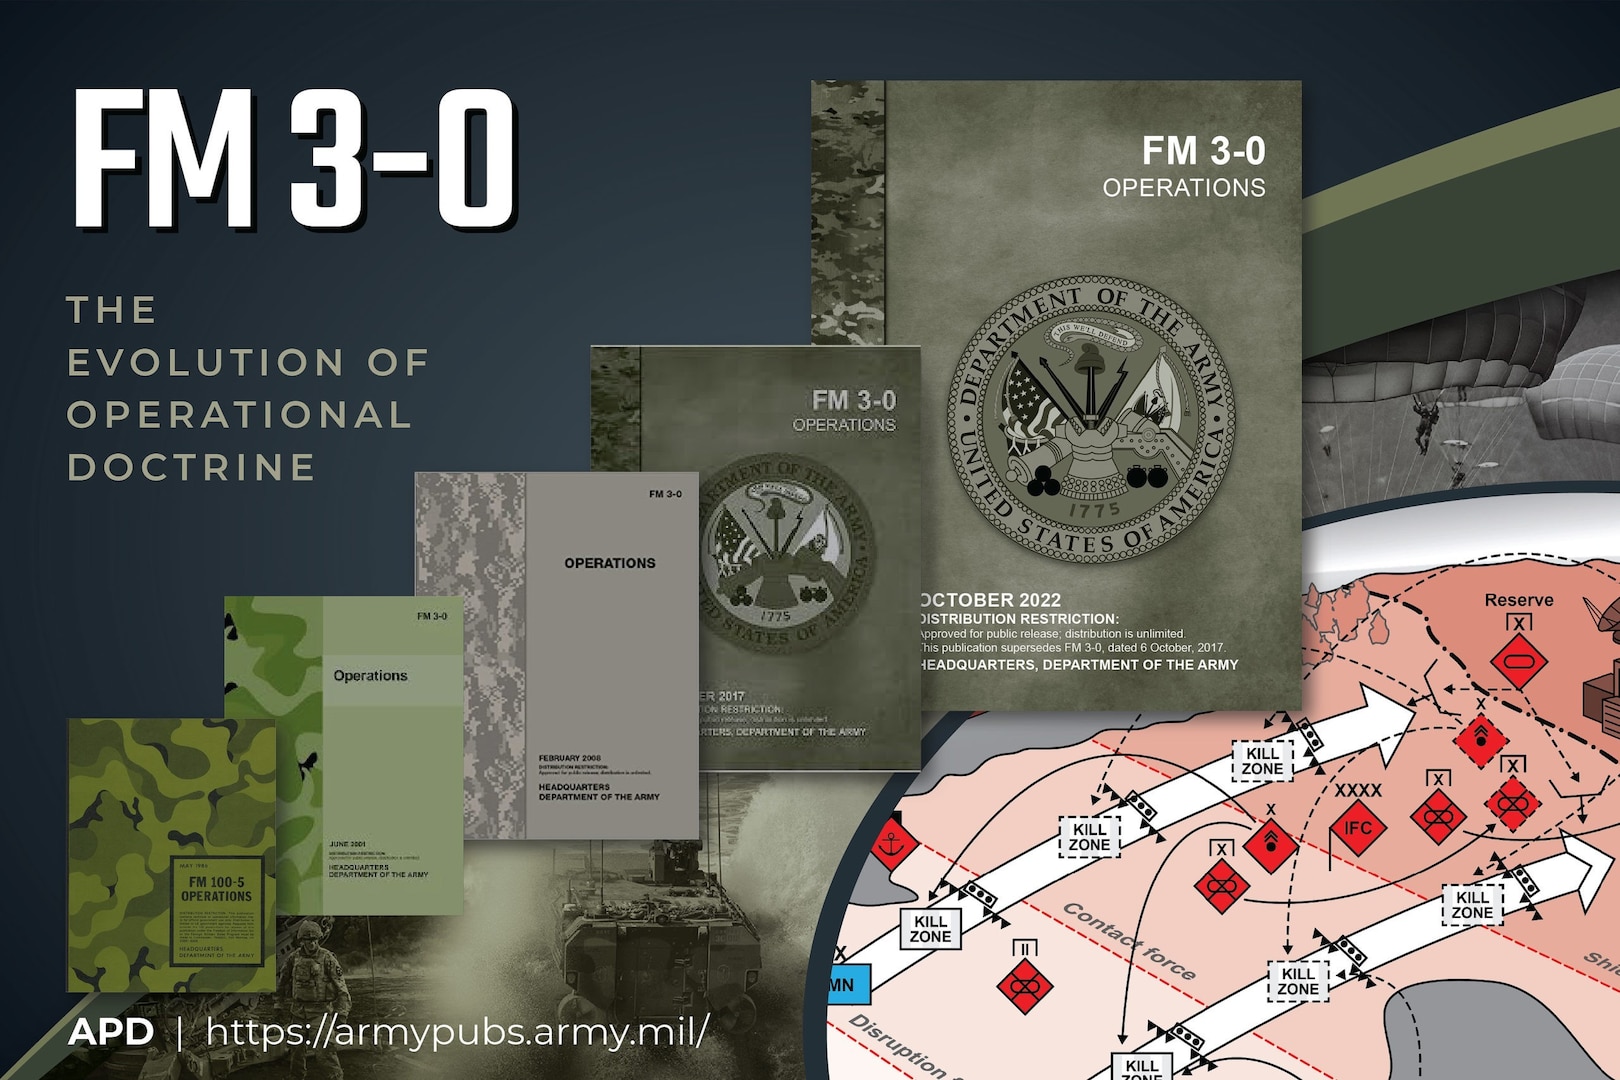 The newly updated FM 3-0 establishes multidomain operations as the Army’s operational concept. The focus remains on large-scale combat operations against adversaries able to contest the joint force in the land, air, maritime, space and cyberspace domains.